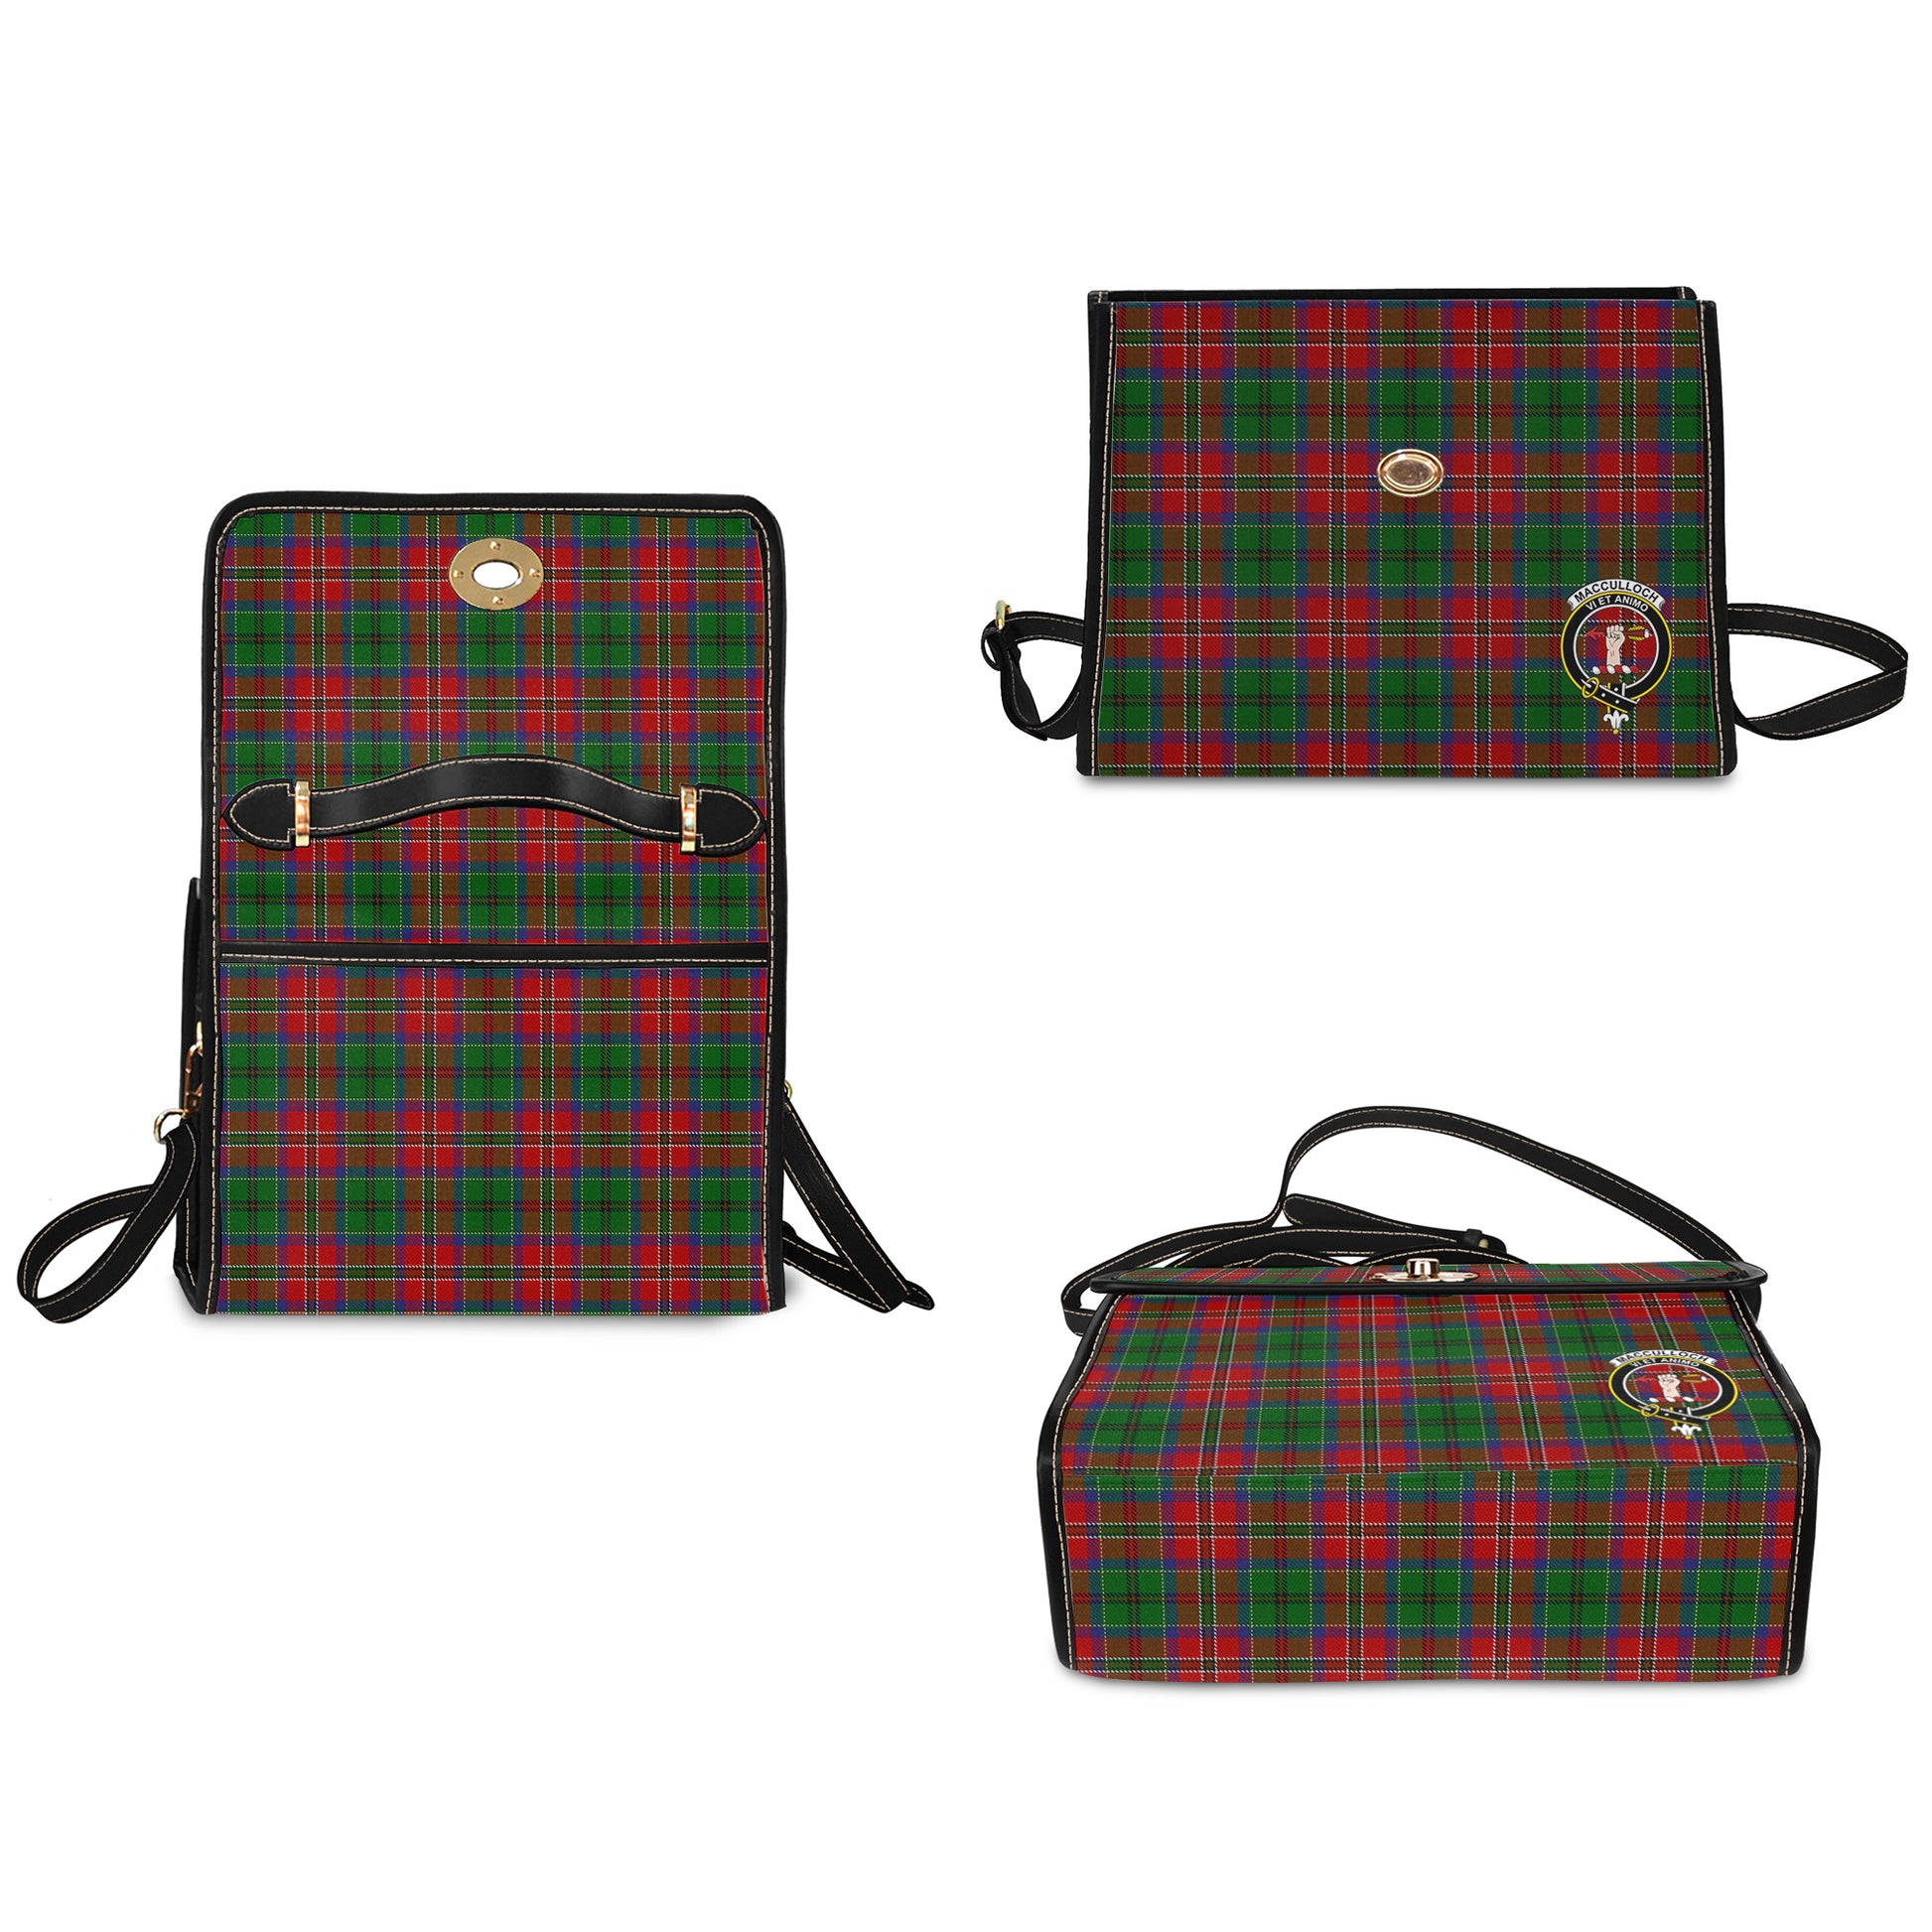 macculloch-tartan-leather-strap-waterproof-canvas-bag-with-family-crest